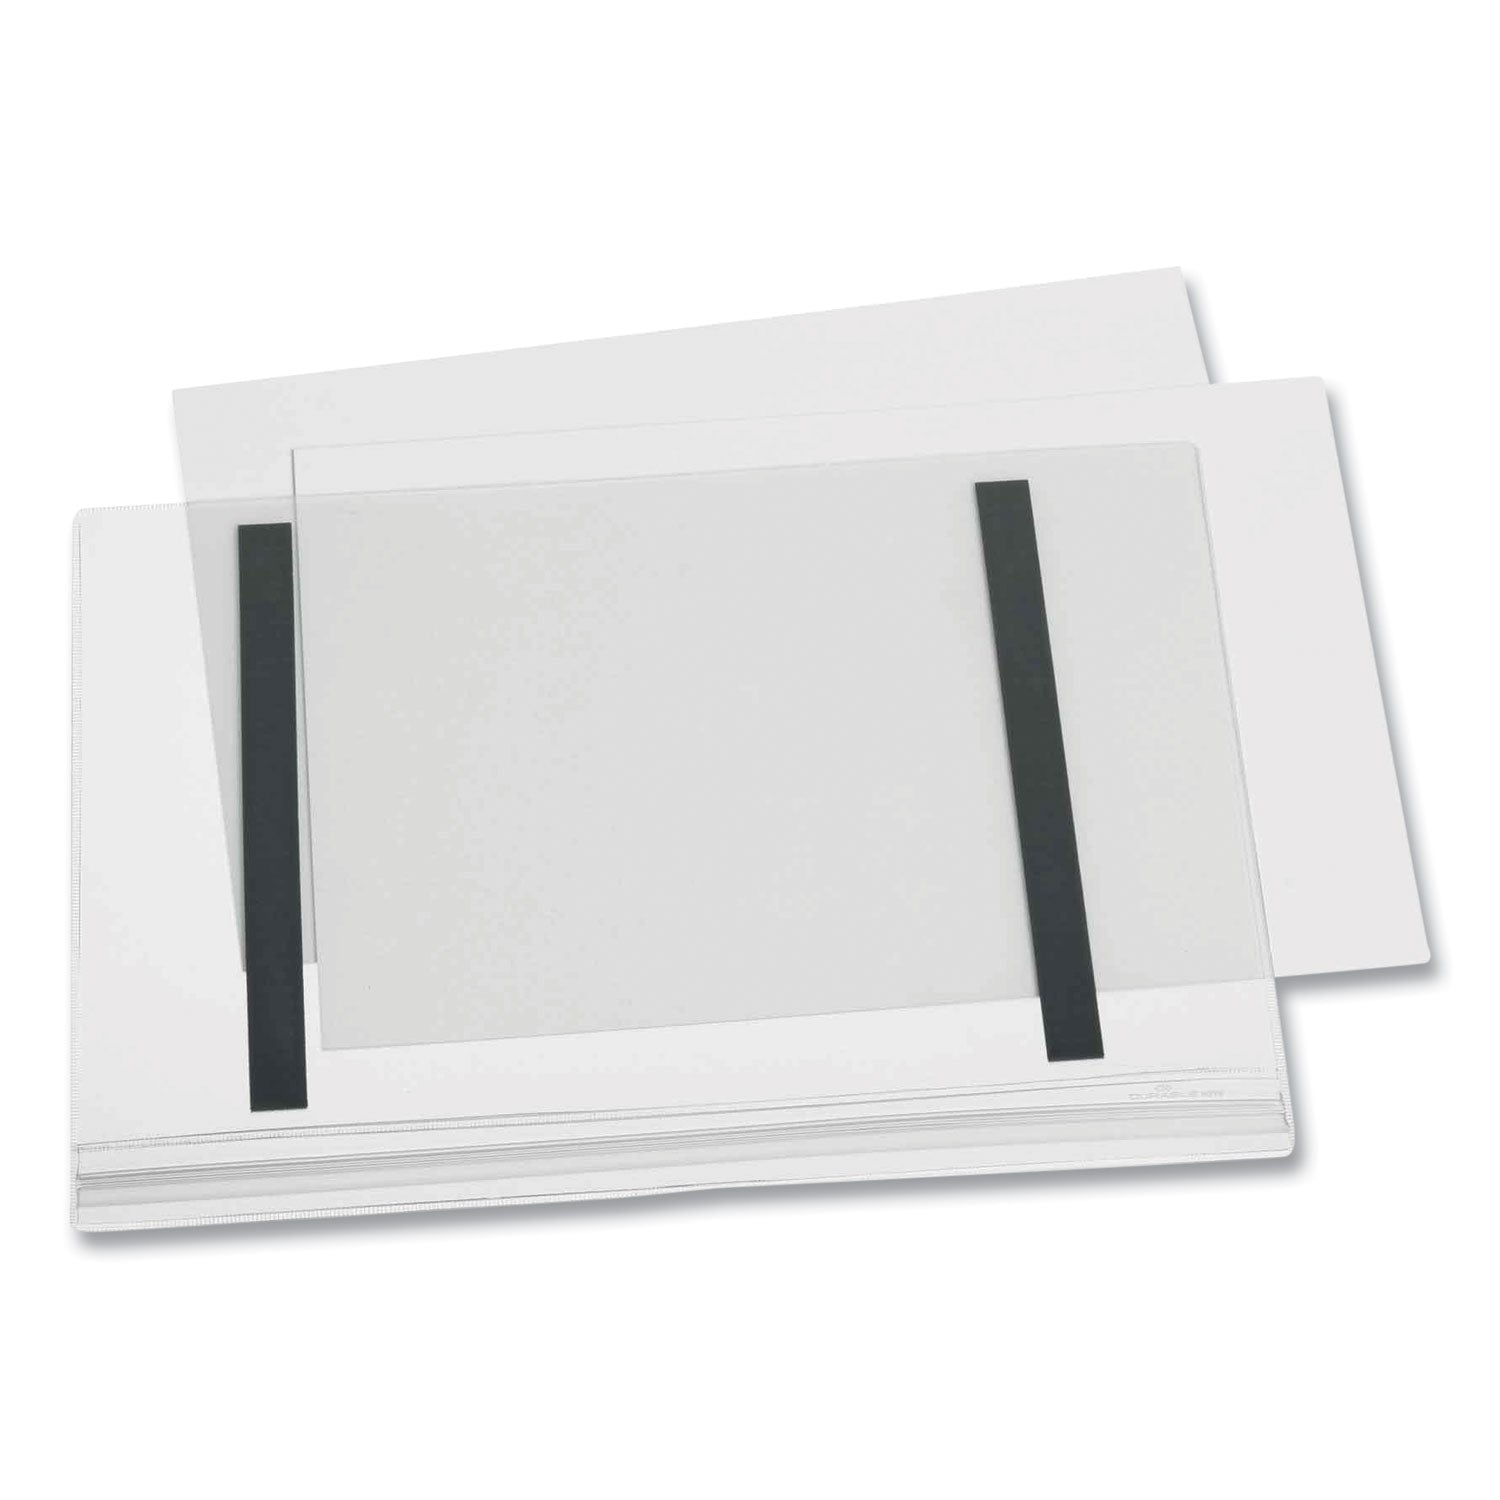 magnetic-water-resistant-sign-holder-85-x-11-clear-frame-5-pack_dbl501819 - 1